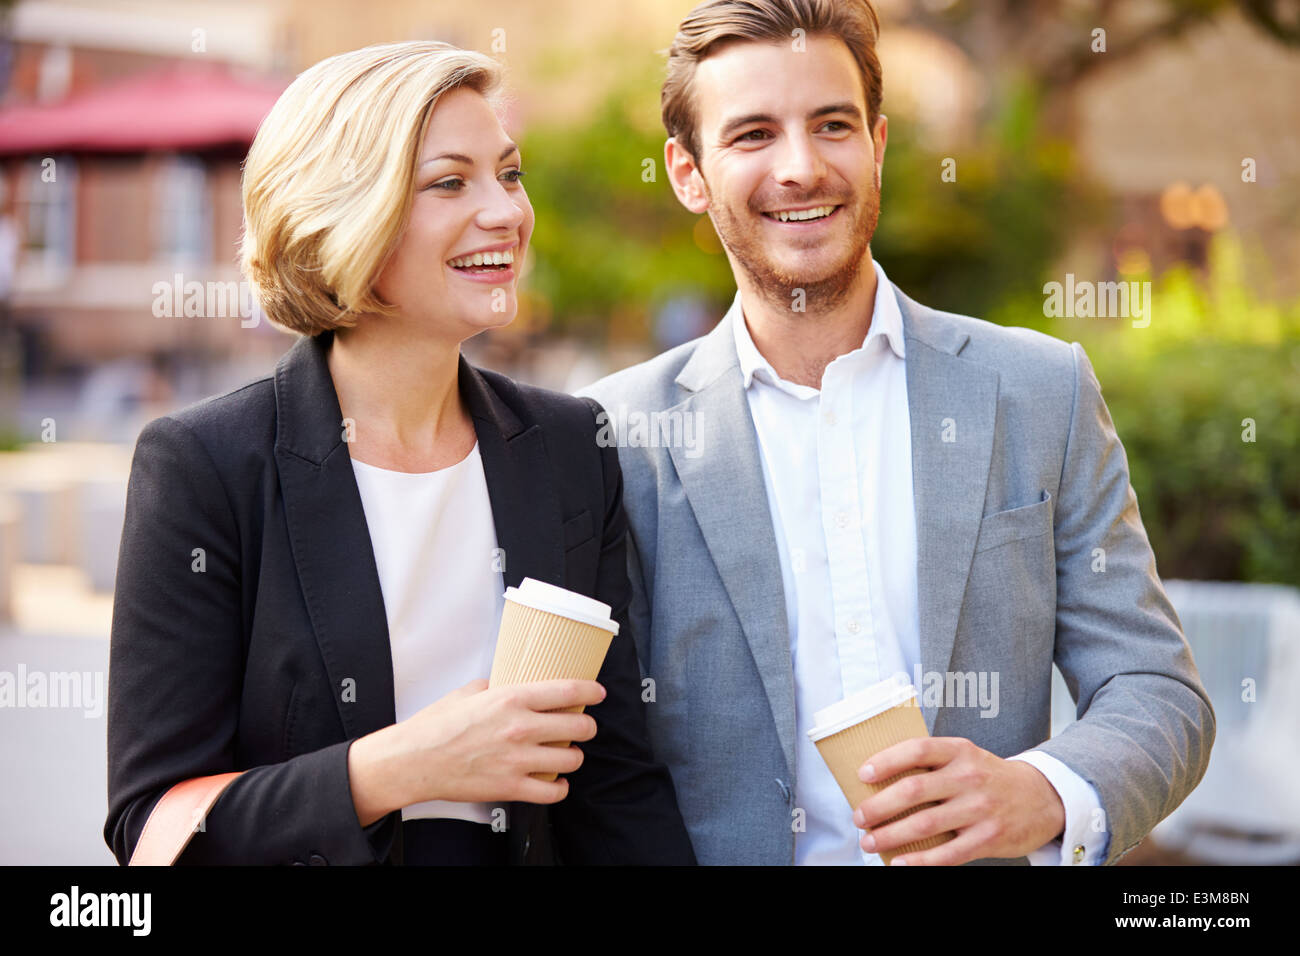 Business Couple Walking Through Park With Takeaway Coffee Stock Photo